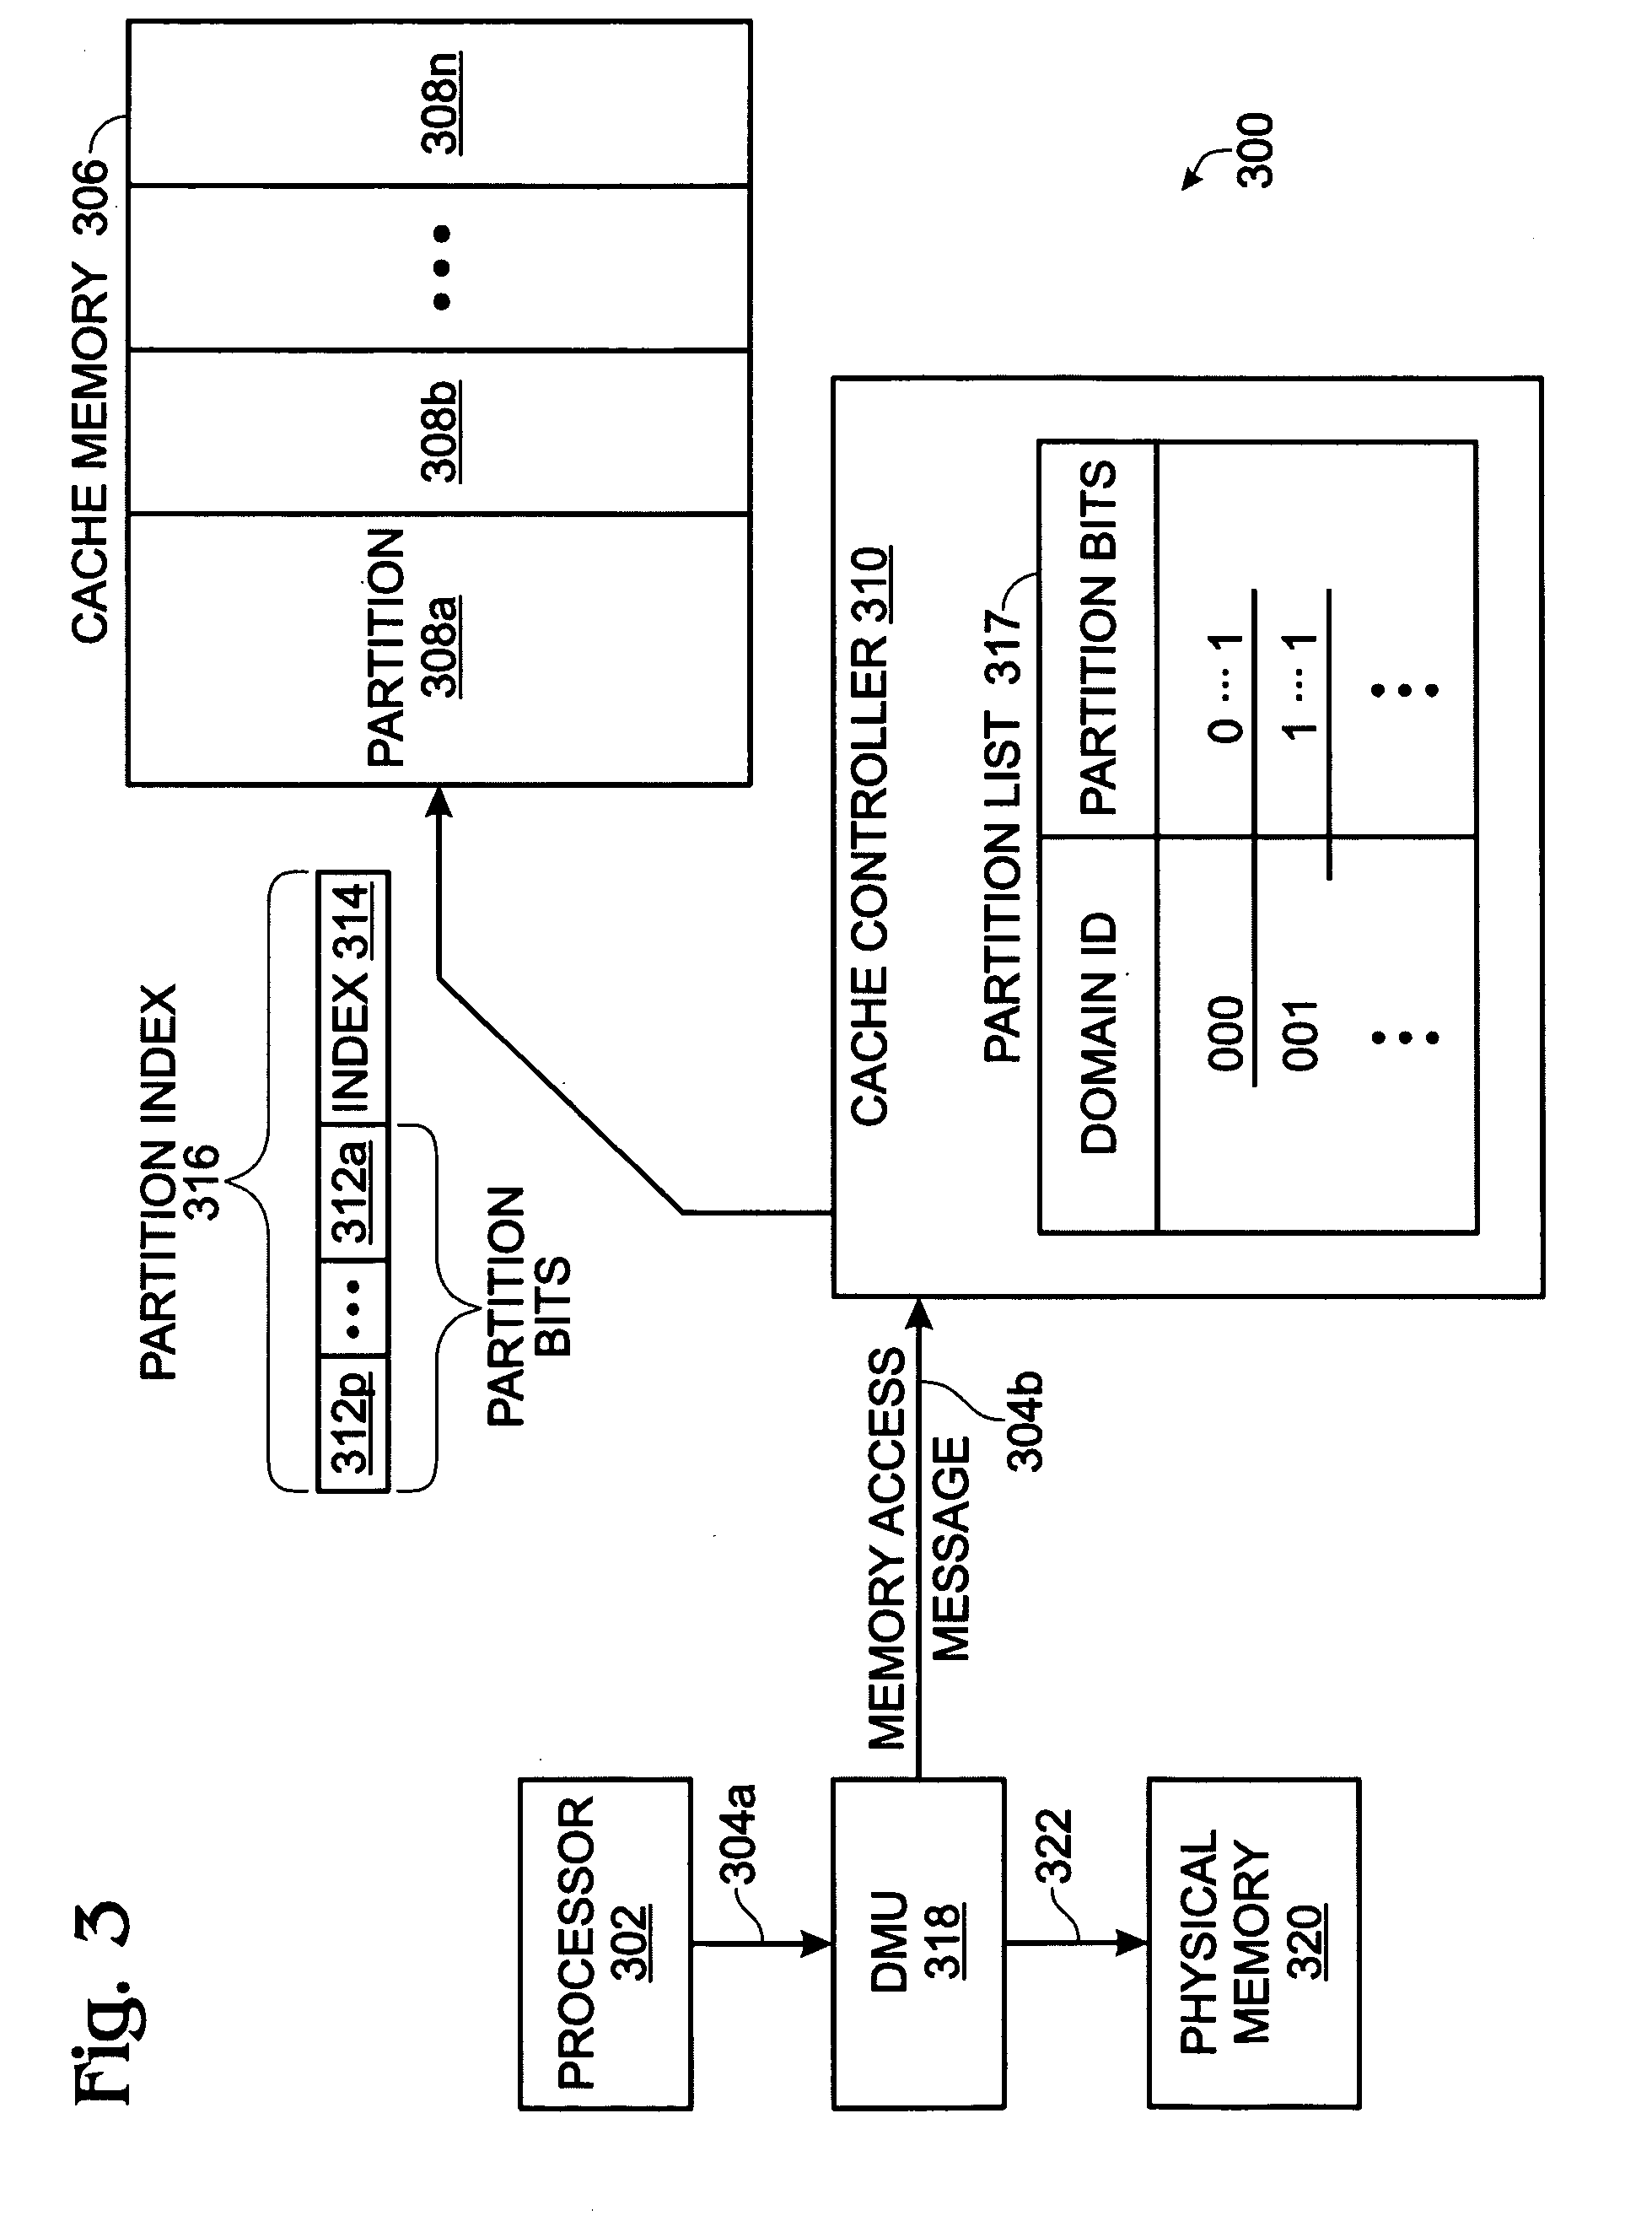 Multi-Domain Management of a Cache in a Processor System